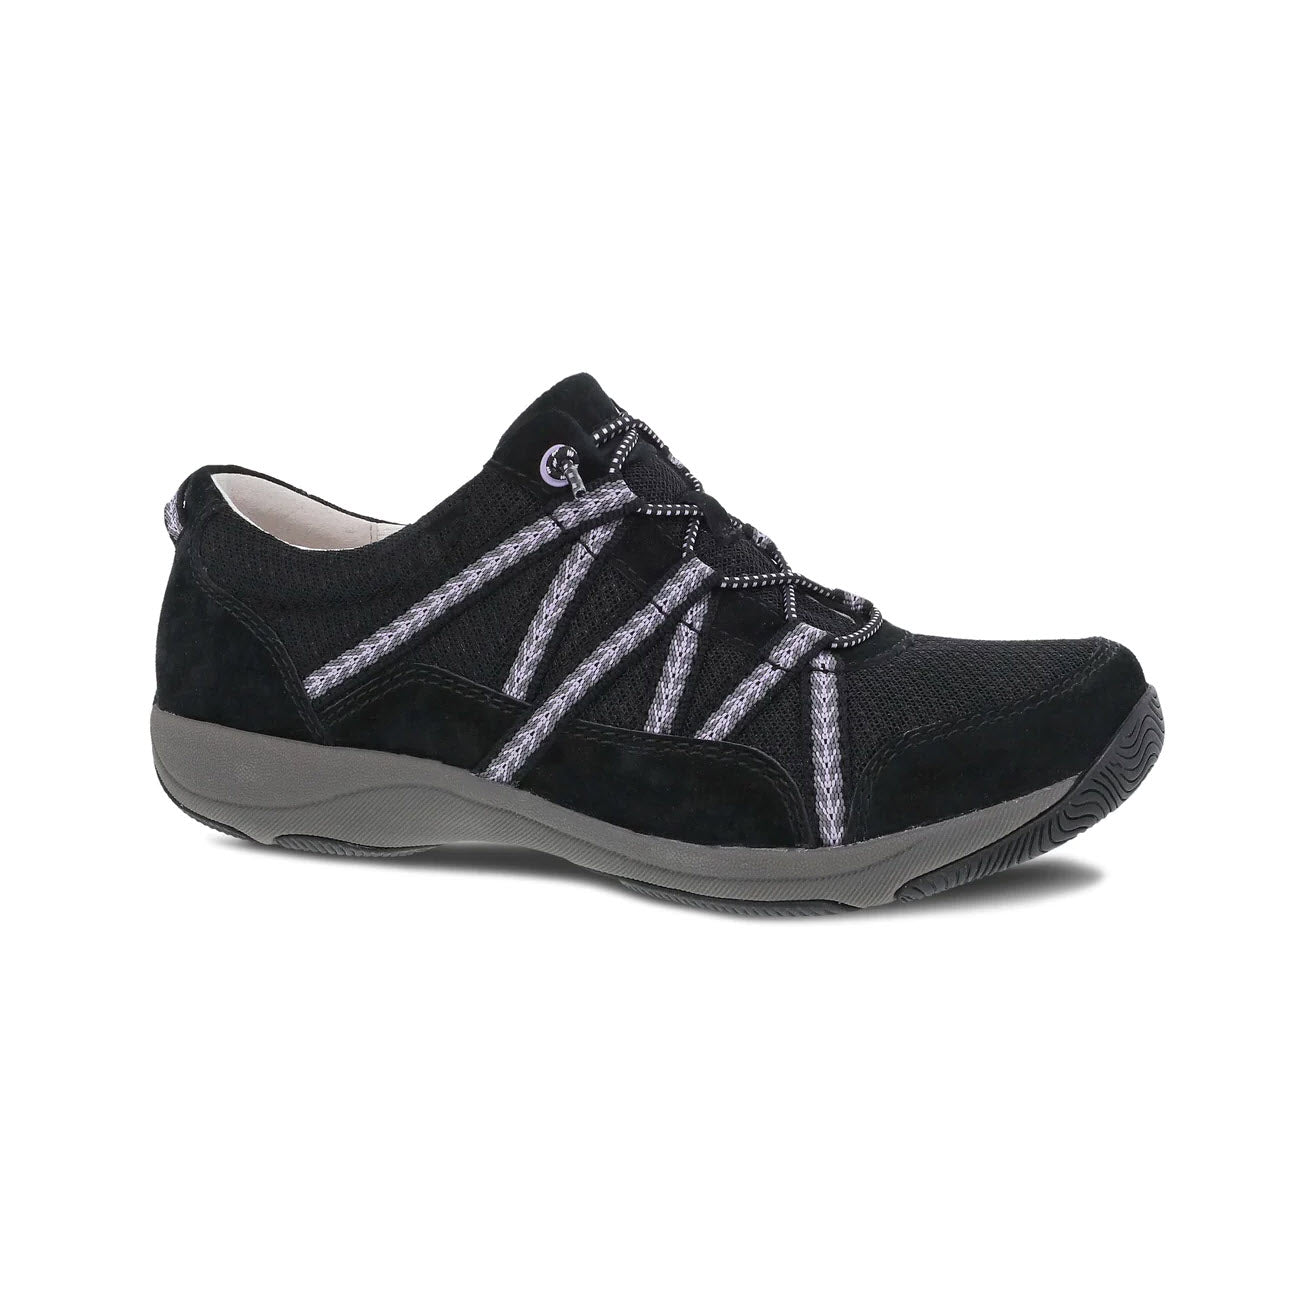 A single Dansko Harlyn Black women's casual sneaker with silver accents and premium support, displayed against a white background.